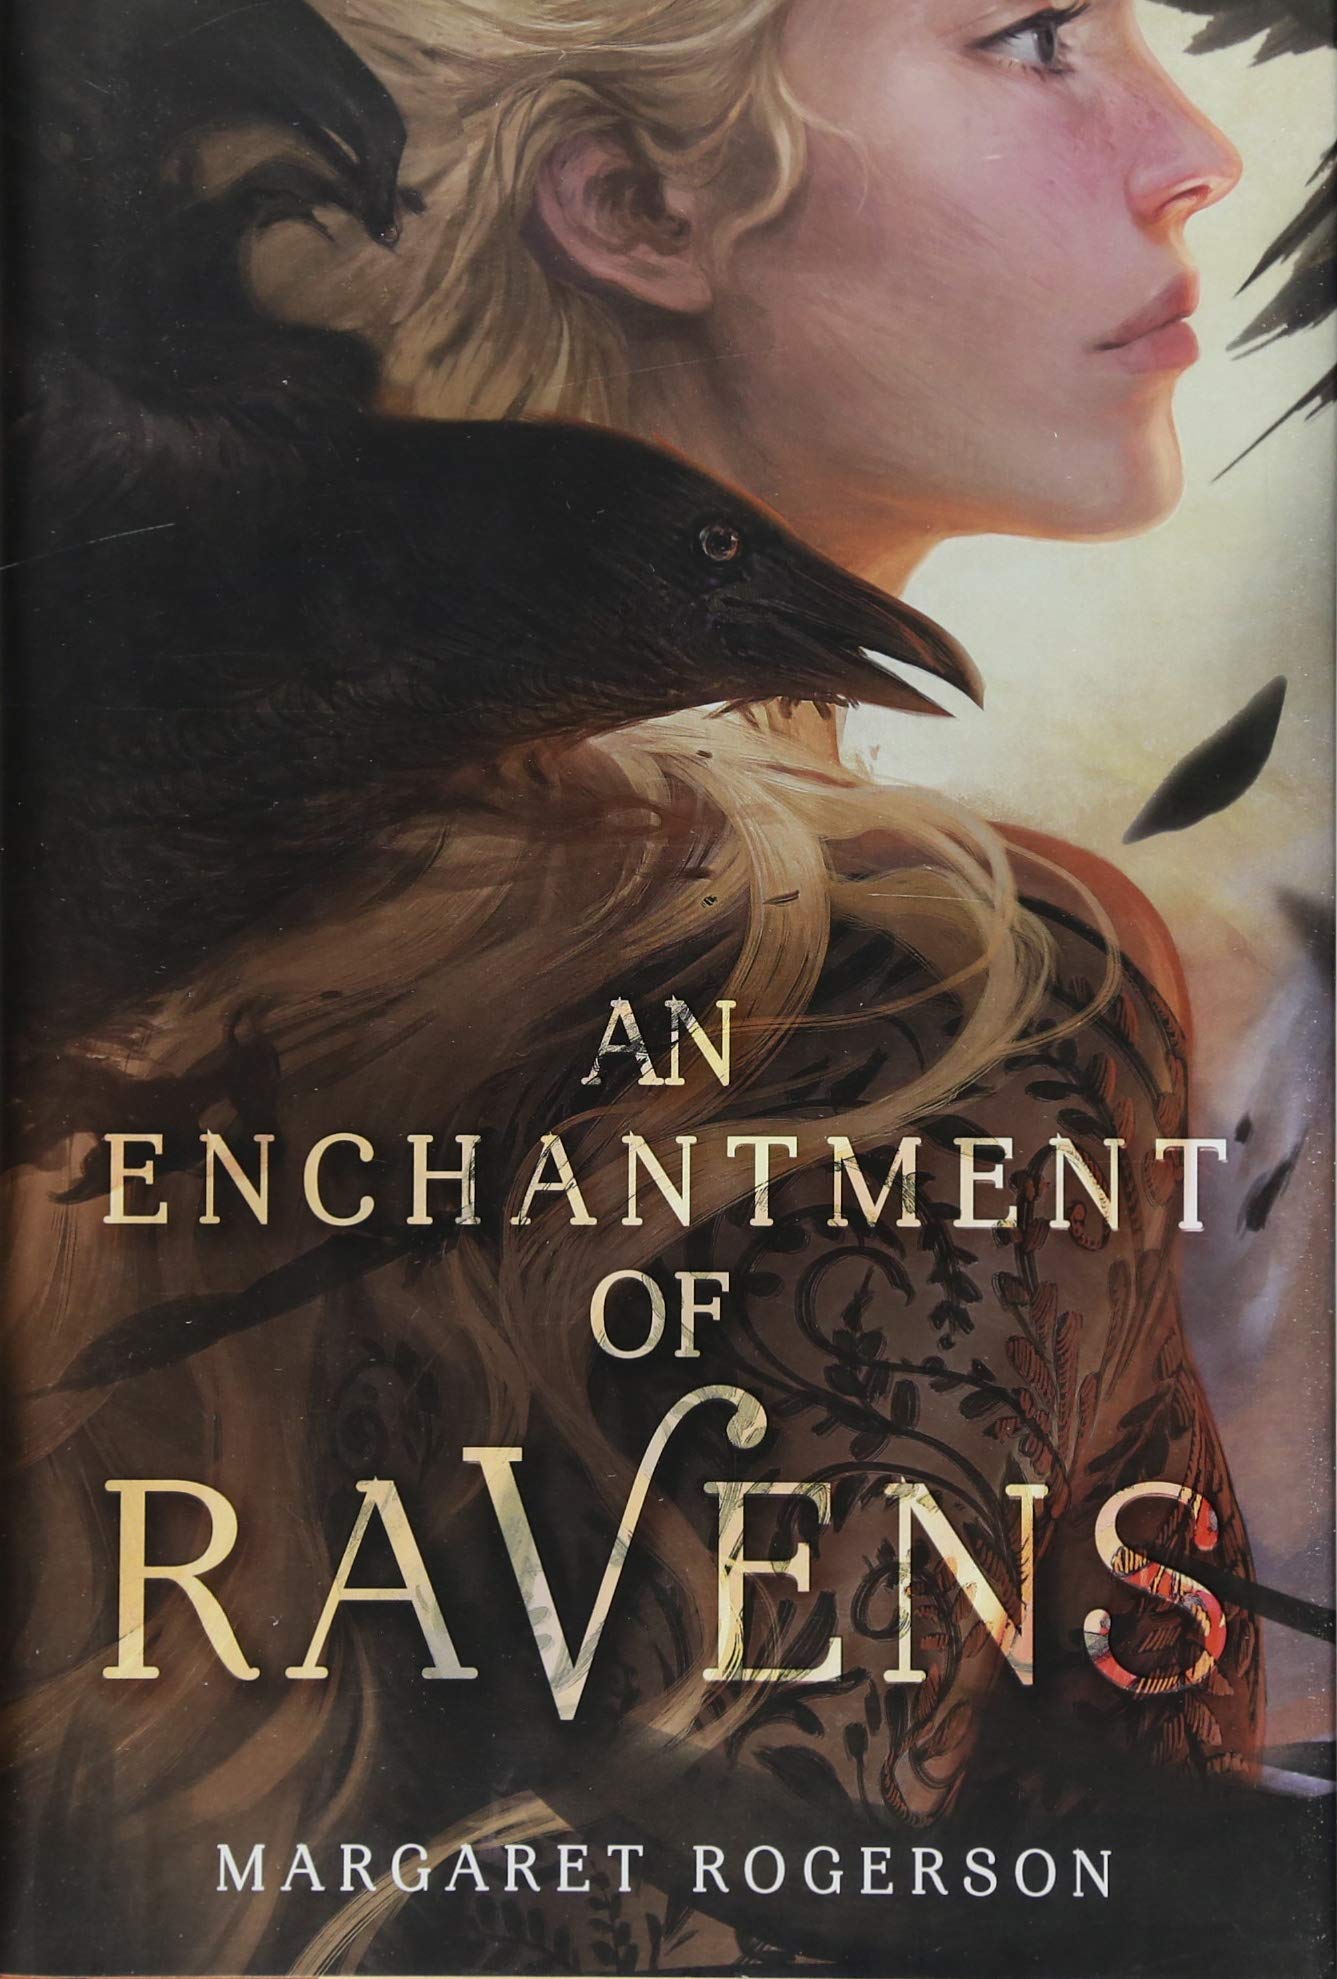 a river enchanted book review